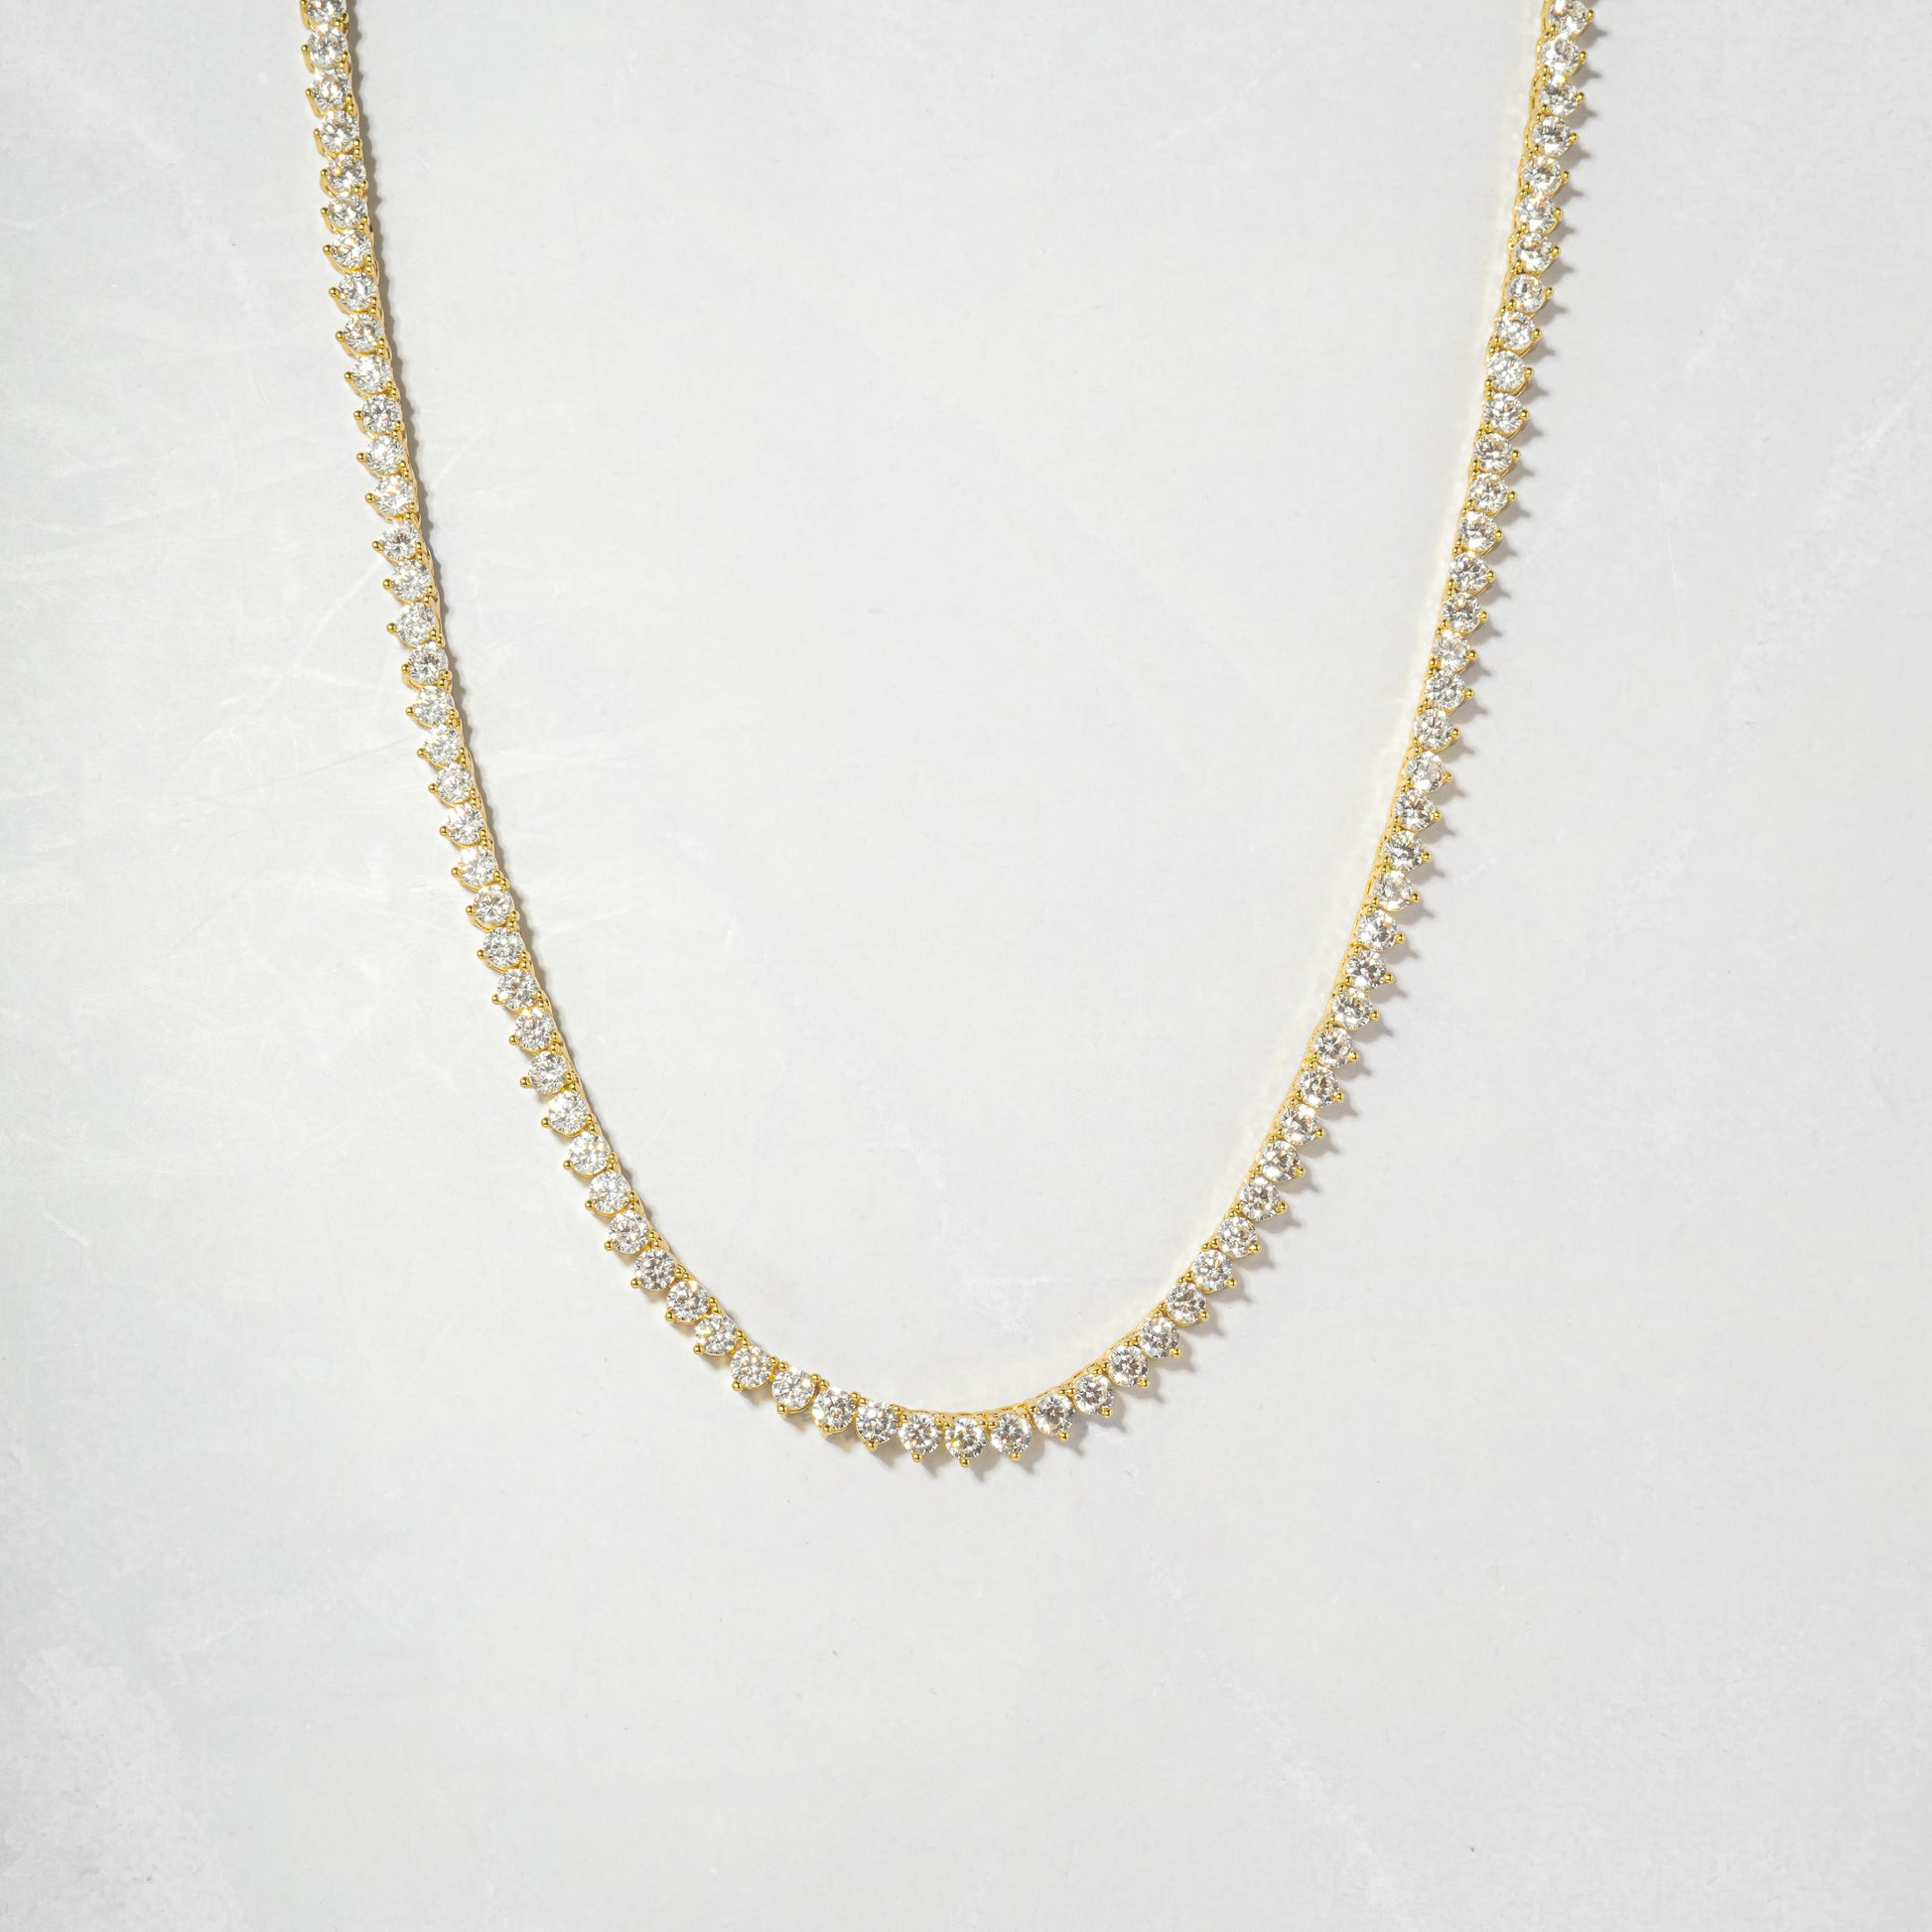 a gold necklace with white stones on a white background